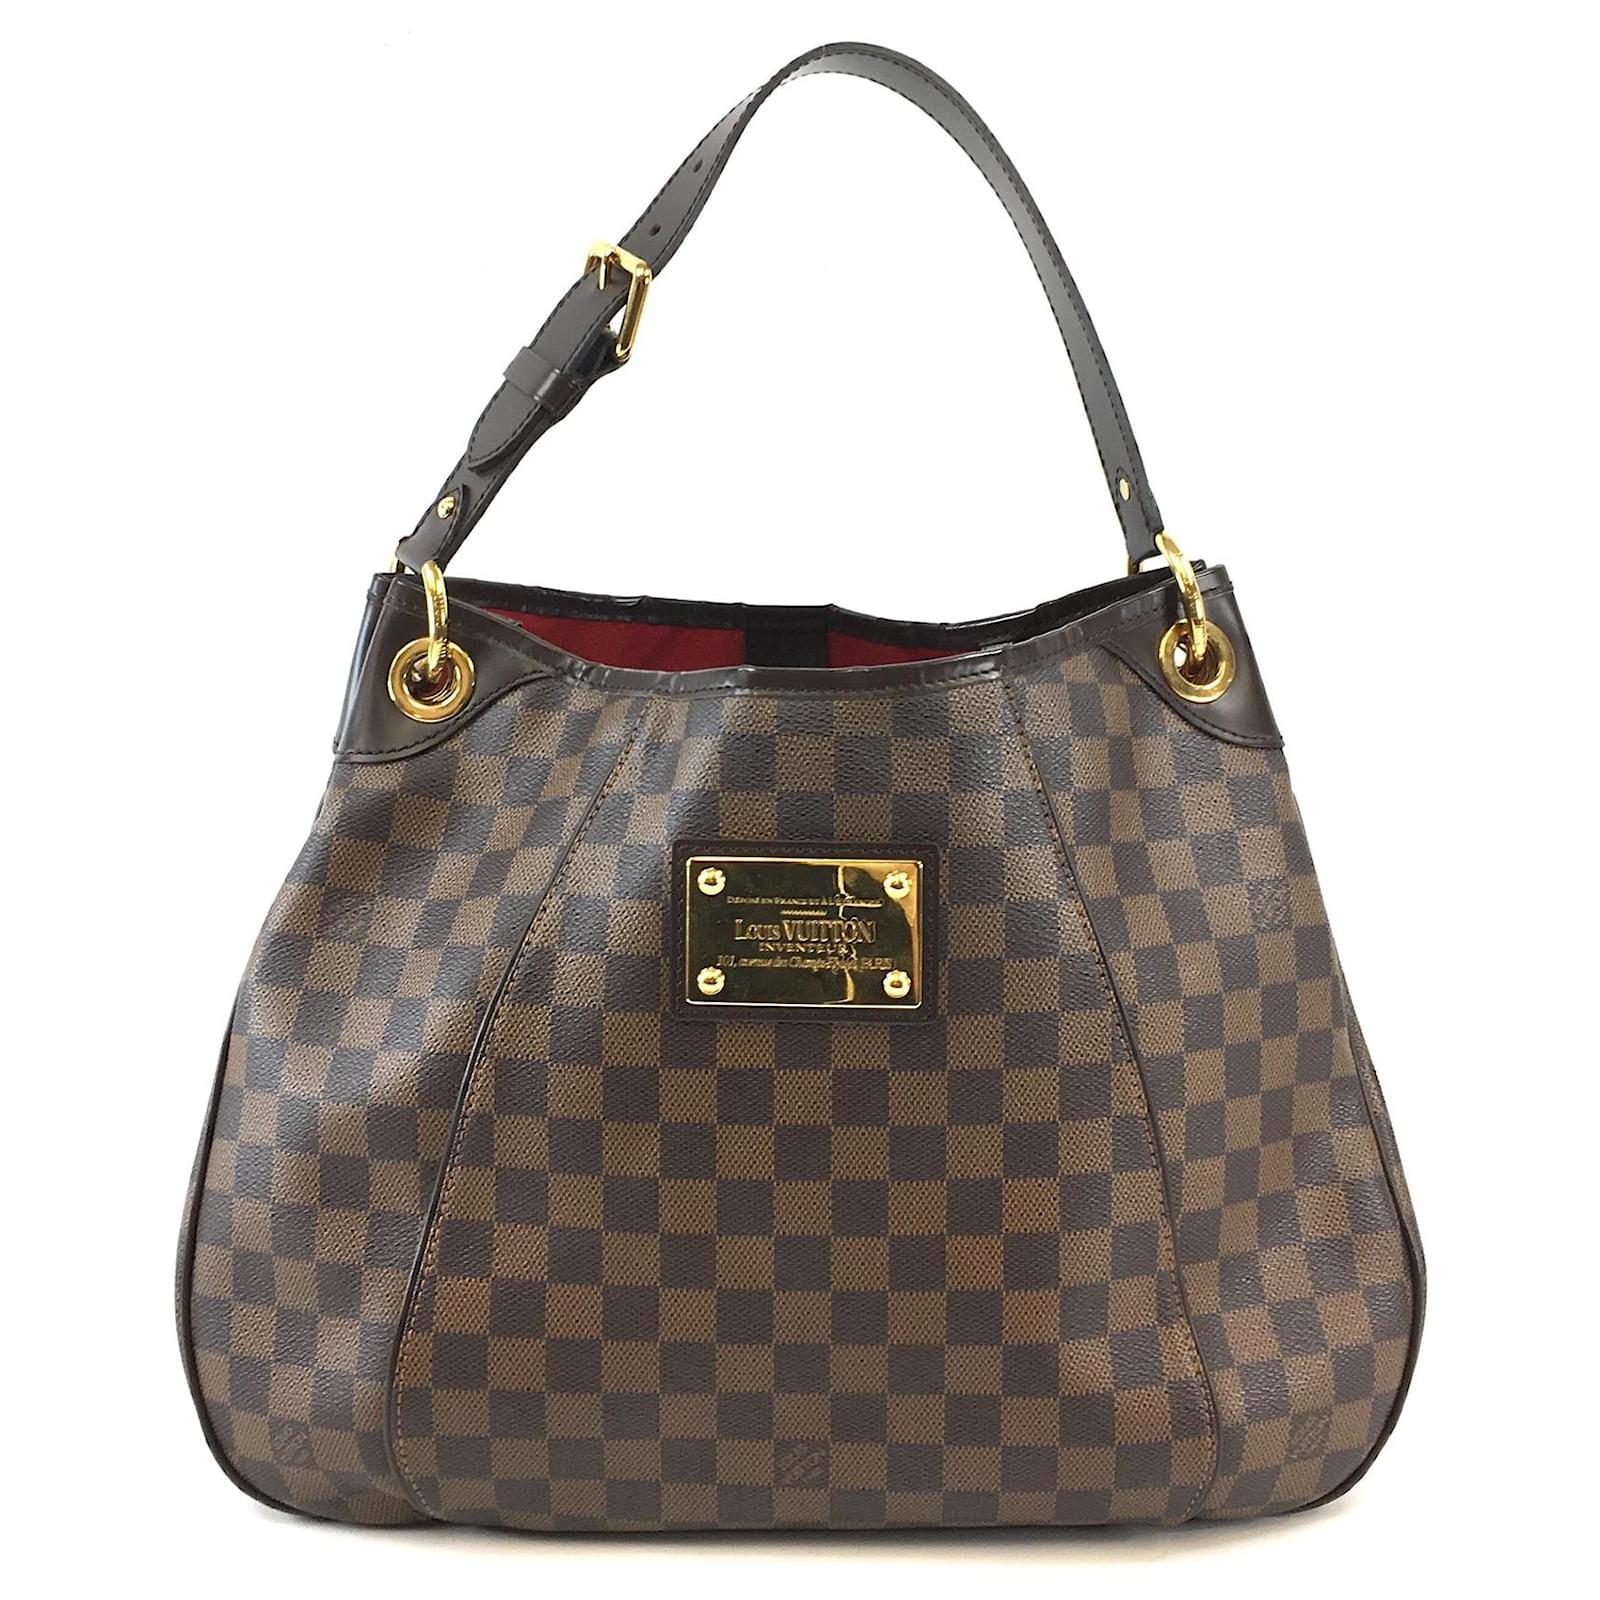 Louis Vuitton Beige/Black Canvas And Patent Leather Embellished